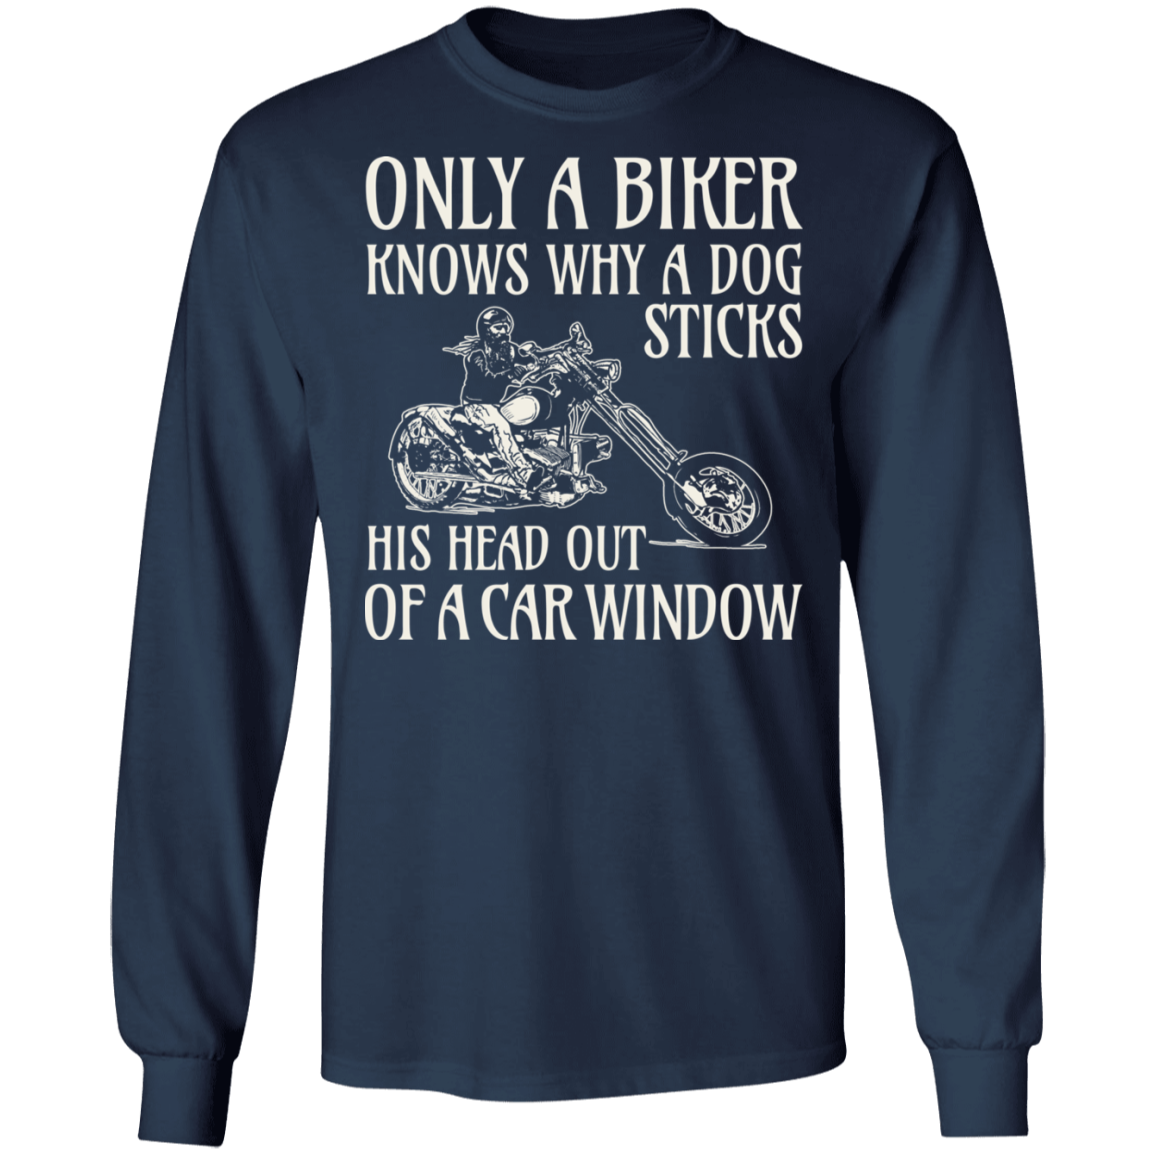 Only a biker knows why a dog sticks his head out of a car window Shirt